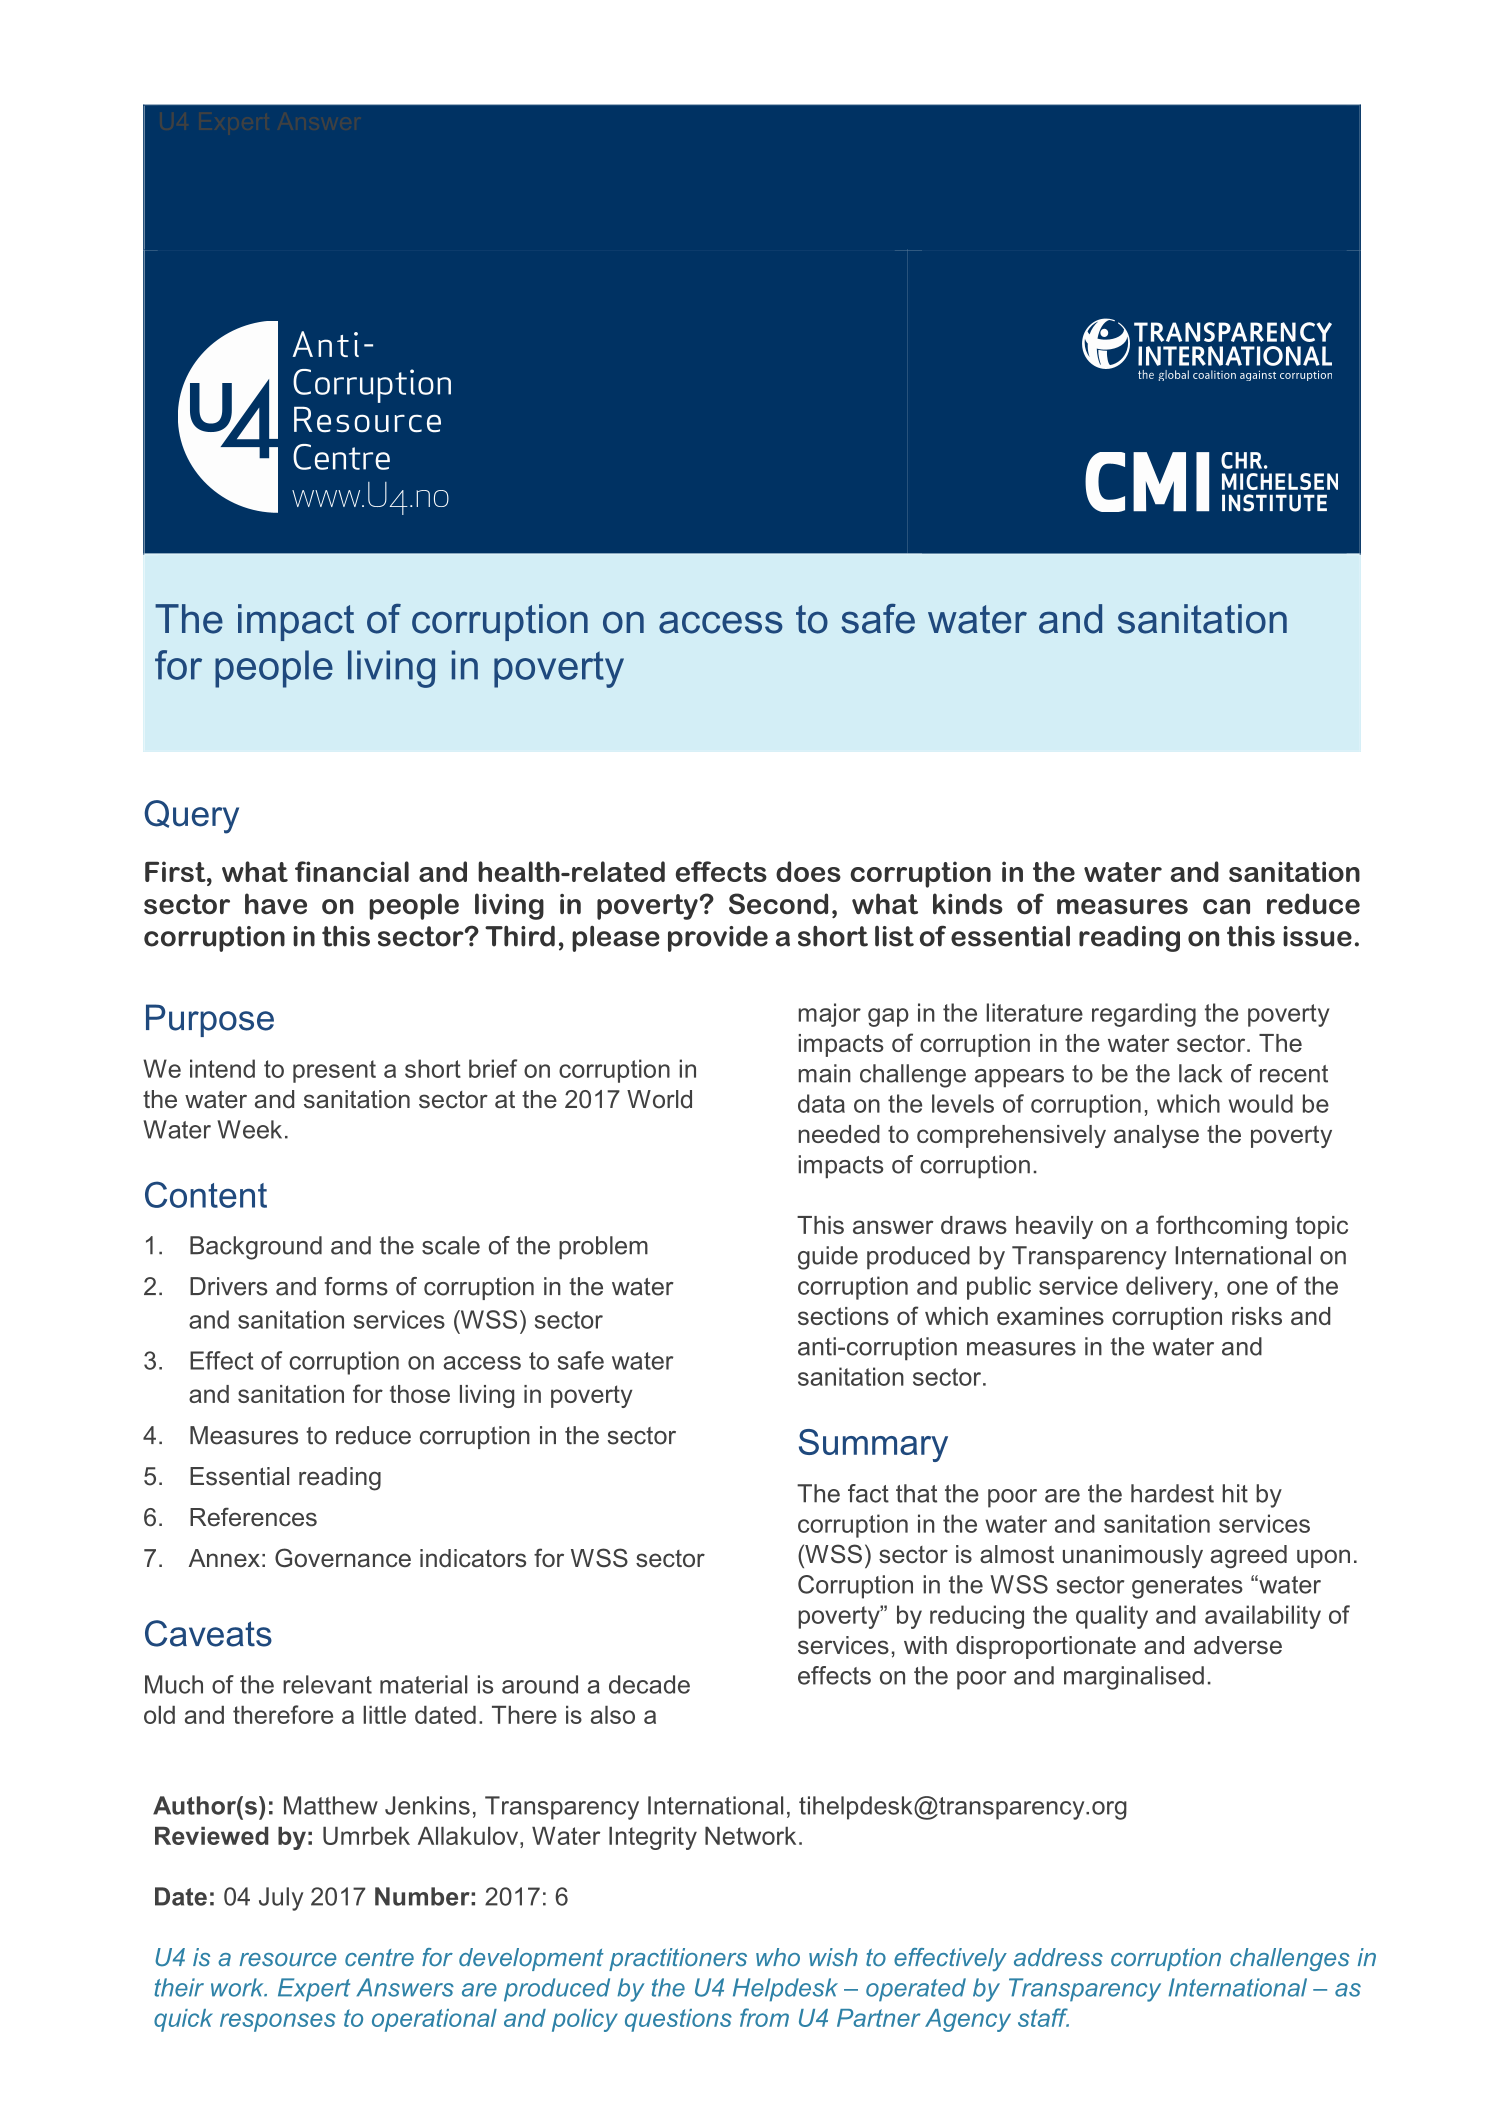 The impact of corruption on access to safe water and sanitation for people living in poverty 